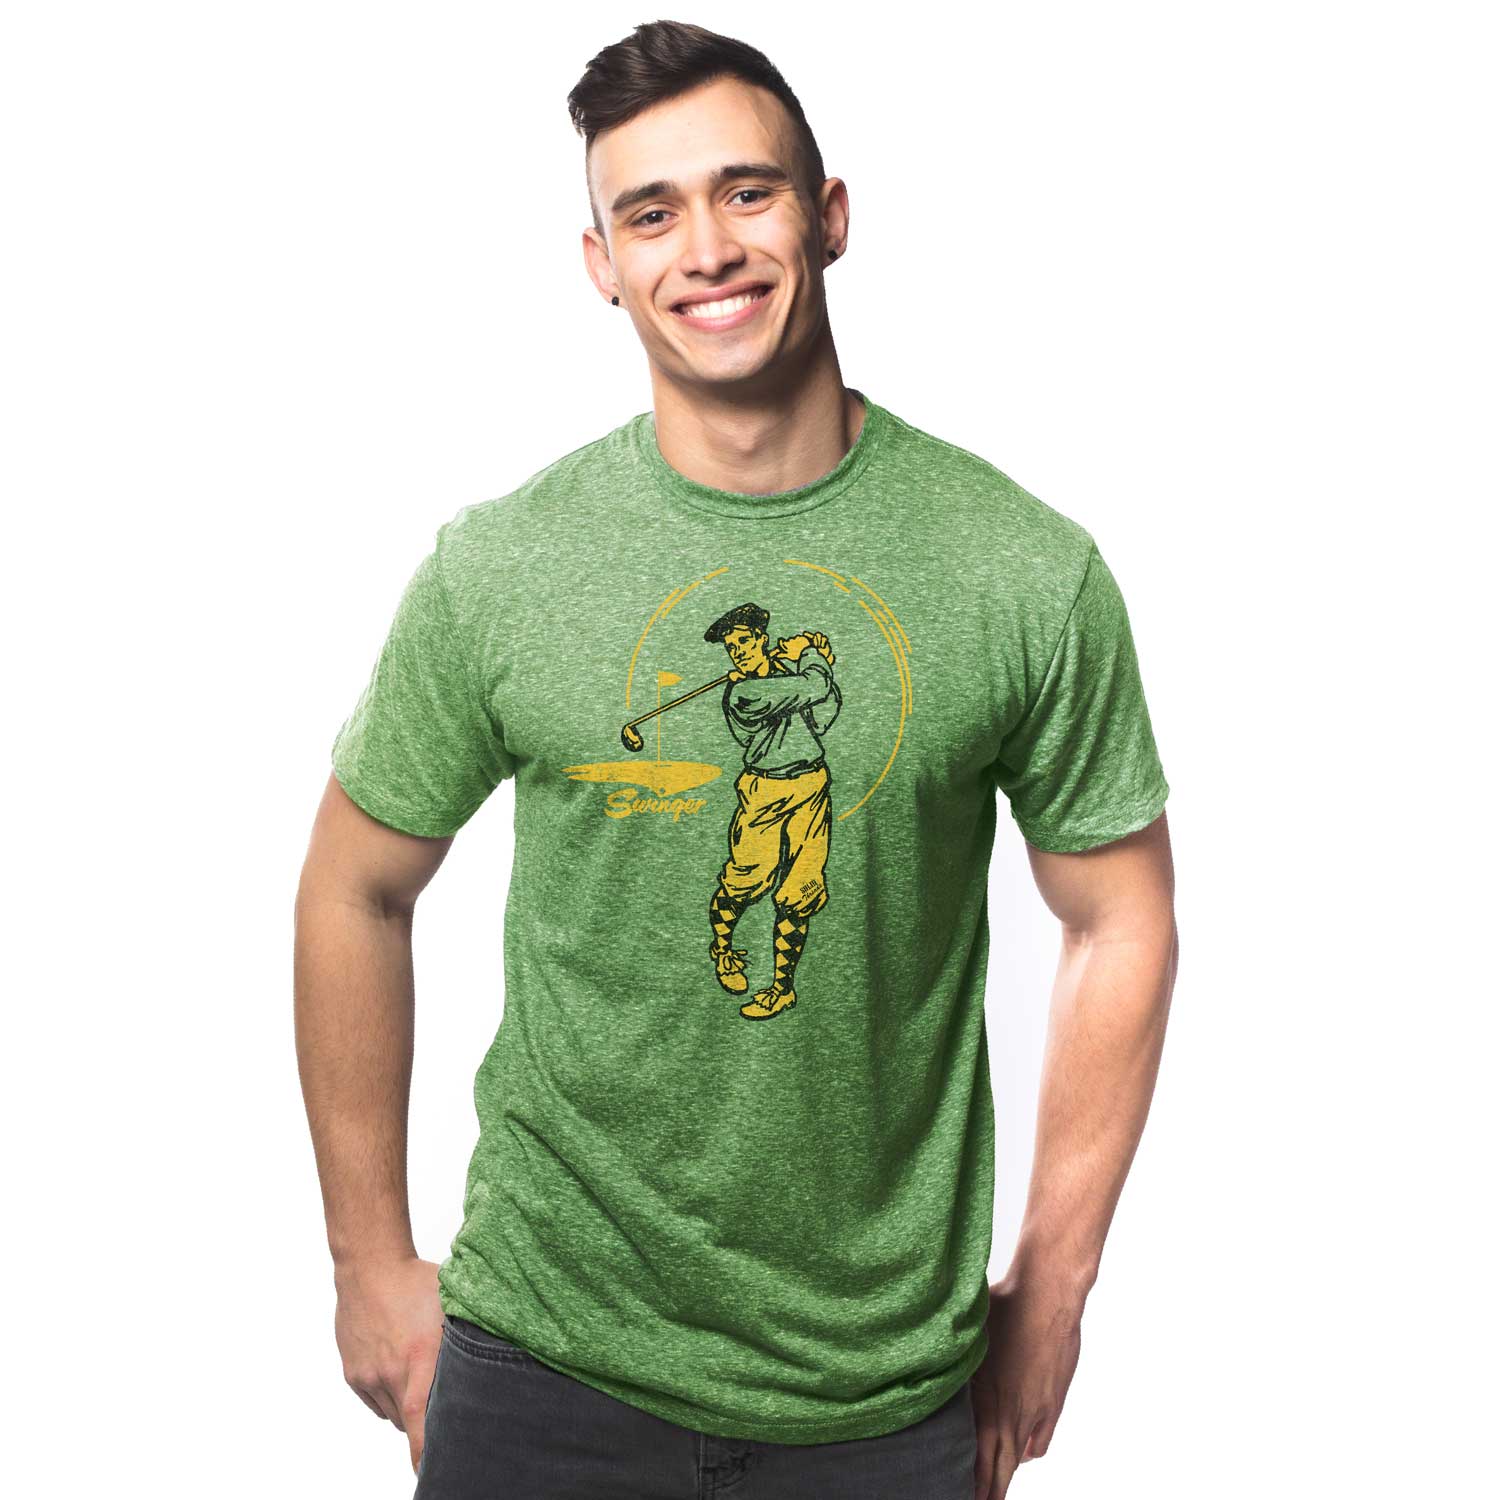 Men's Swinger Vintage Inspired T-shirt | Cool Funny Retro Golfing Graphic Tee | Solid Threads